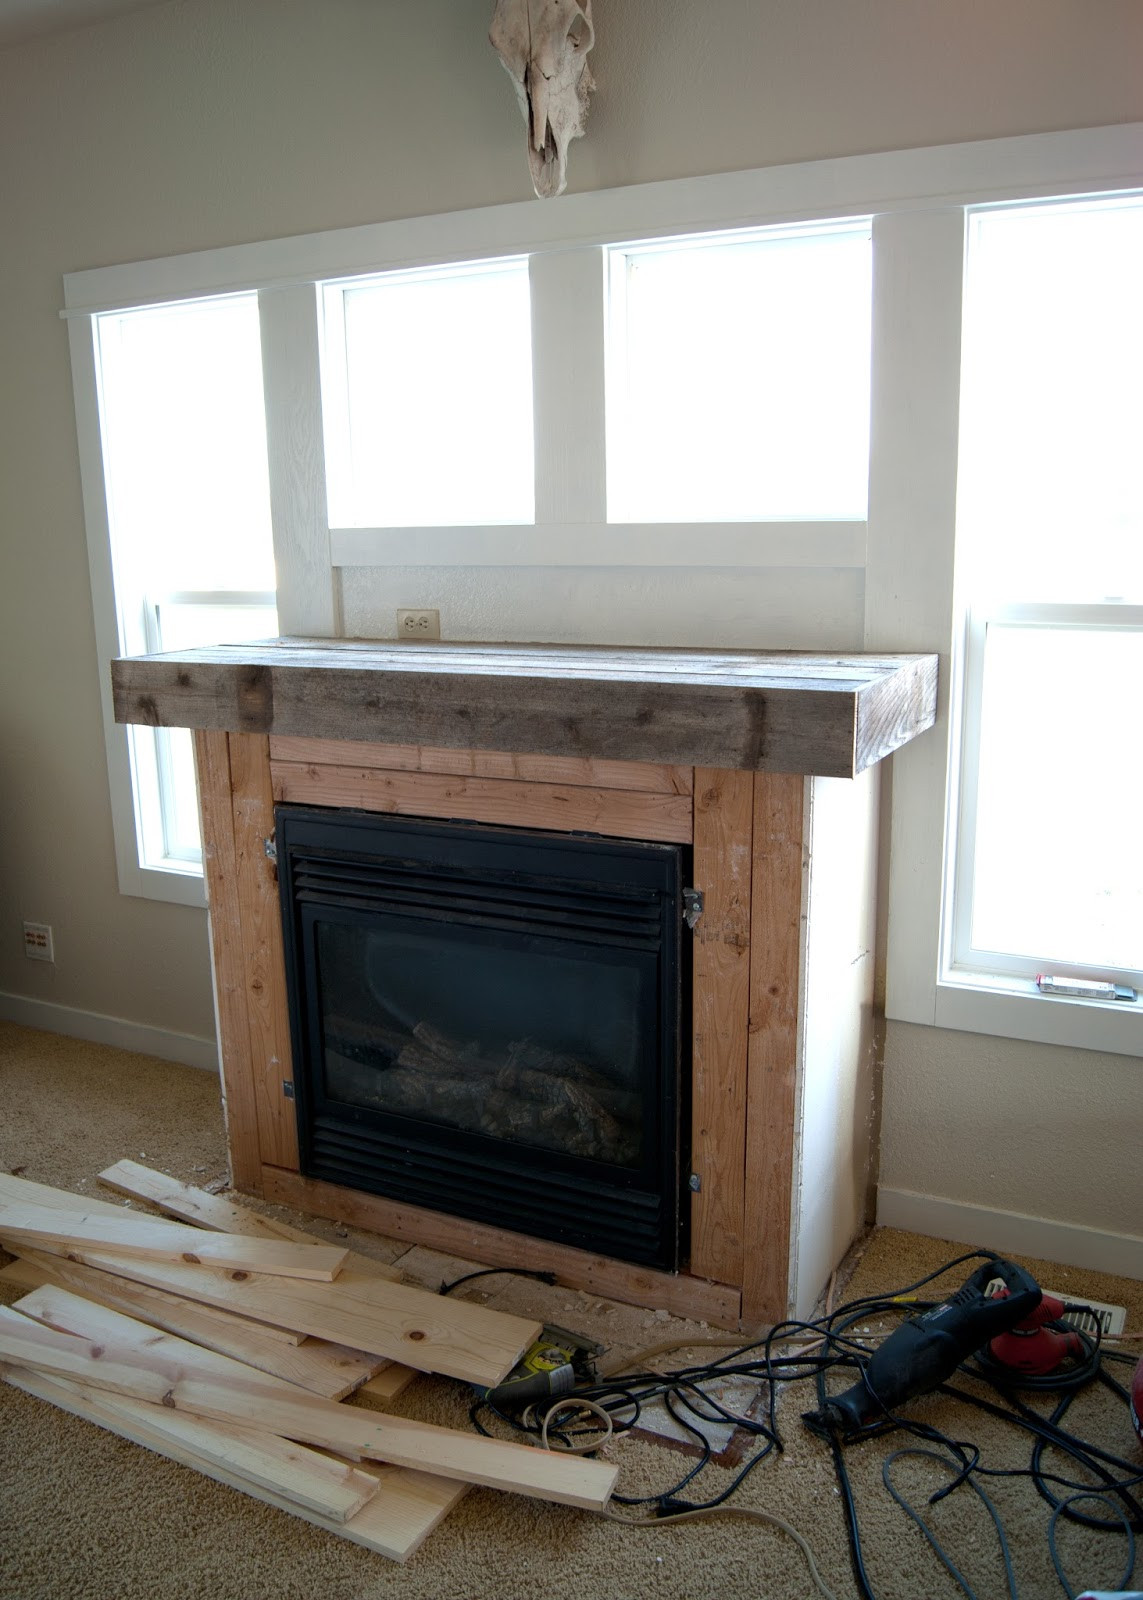 DIY Wood Fireplace Surround
 Fireplace Makeover The Final Reveal